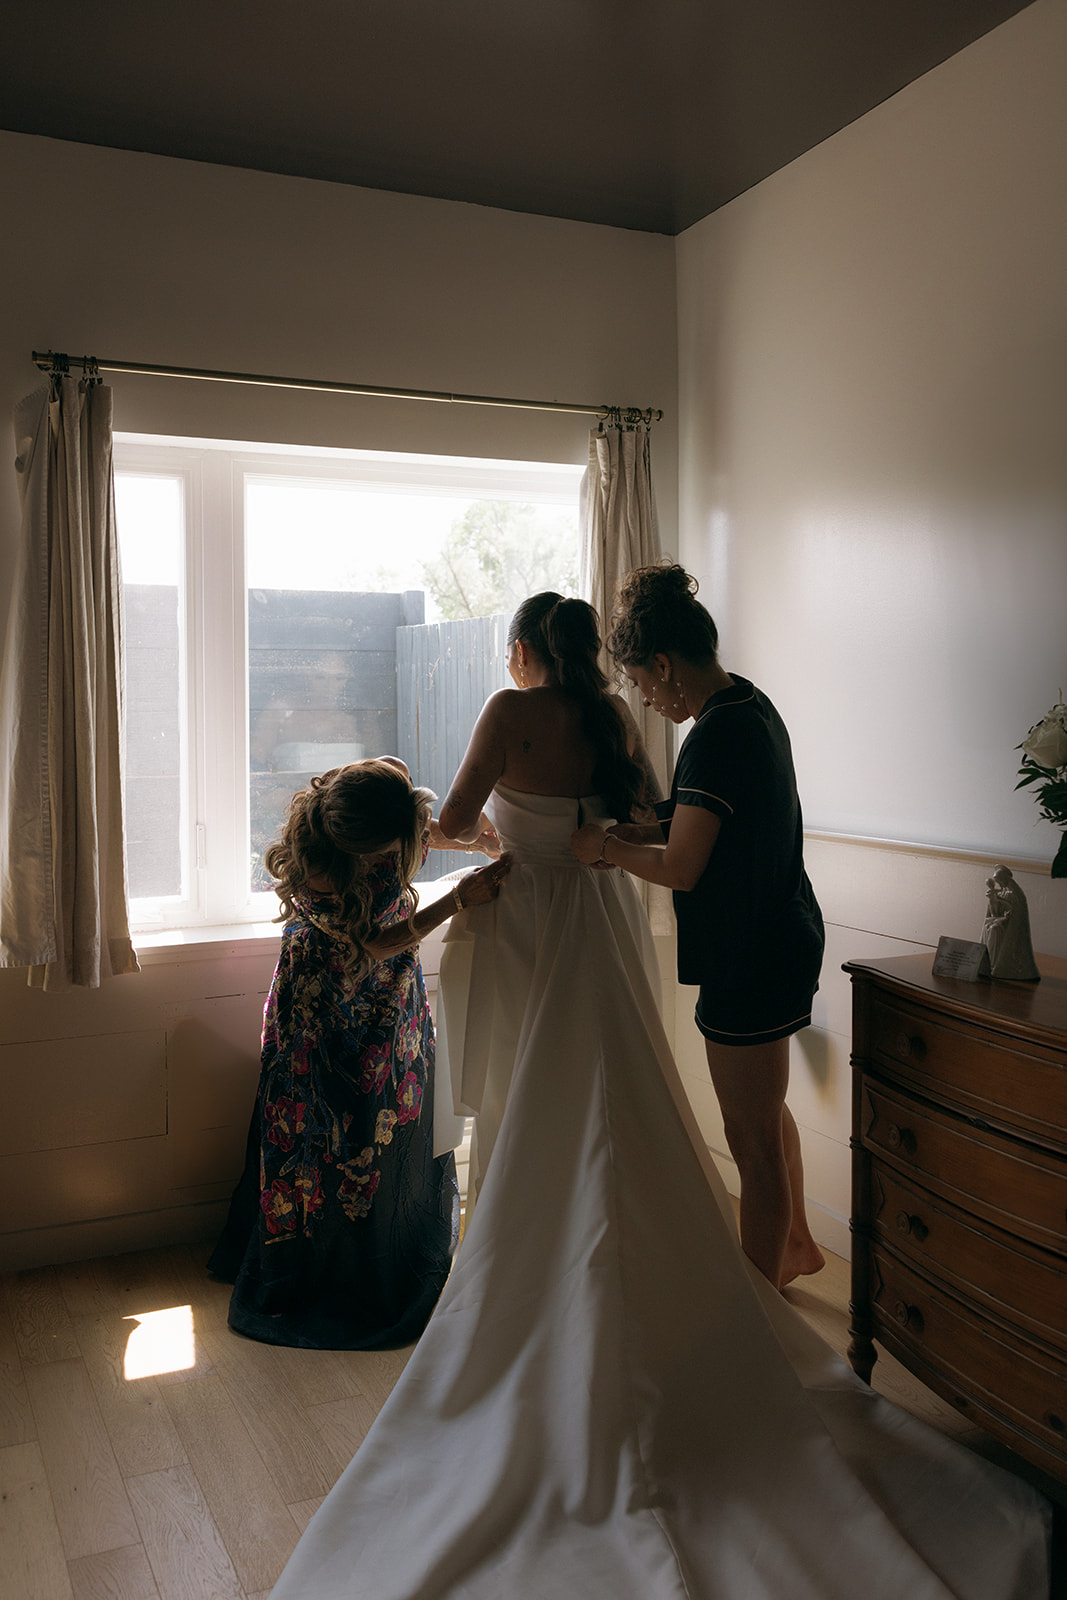 Bride puts on her wedding dress before wedding ceremony at Audrey's Farmhouse